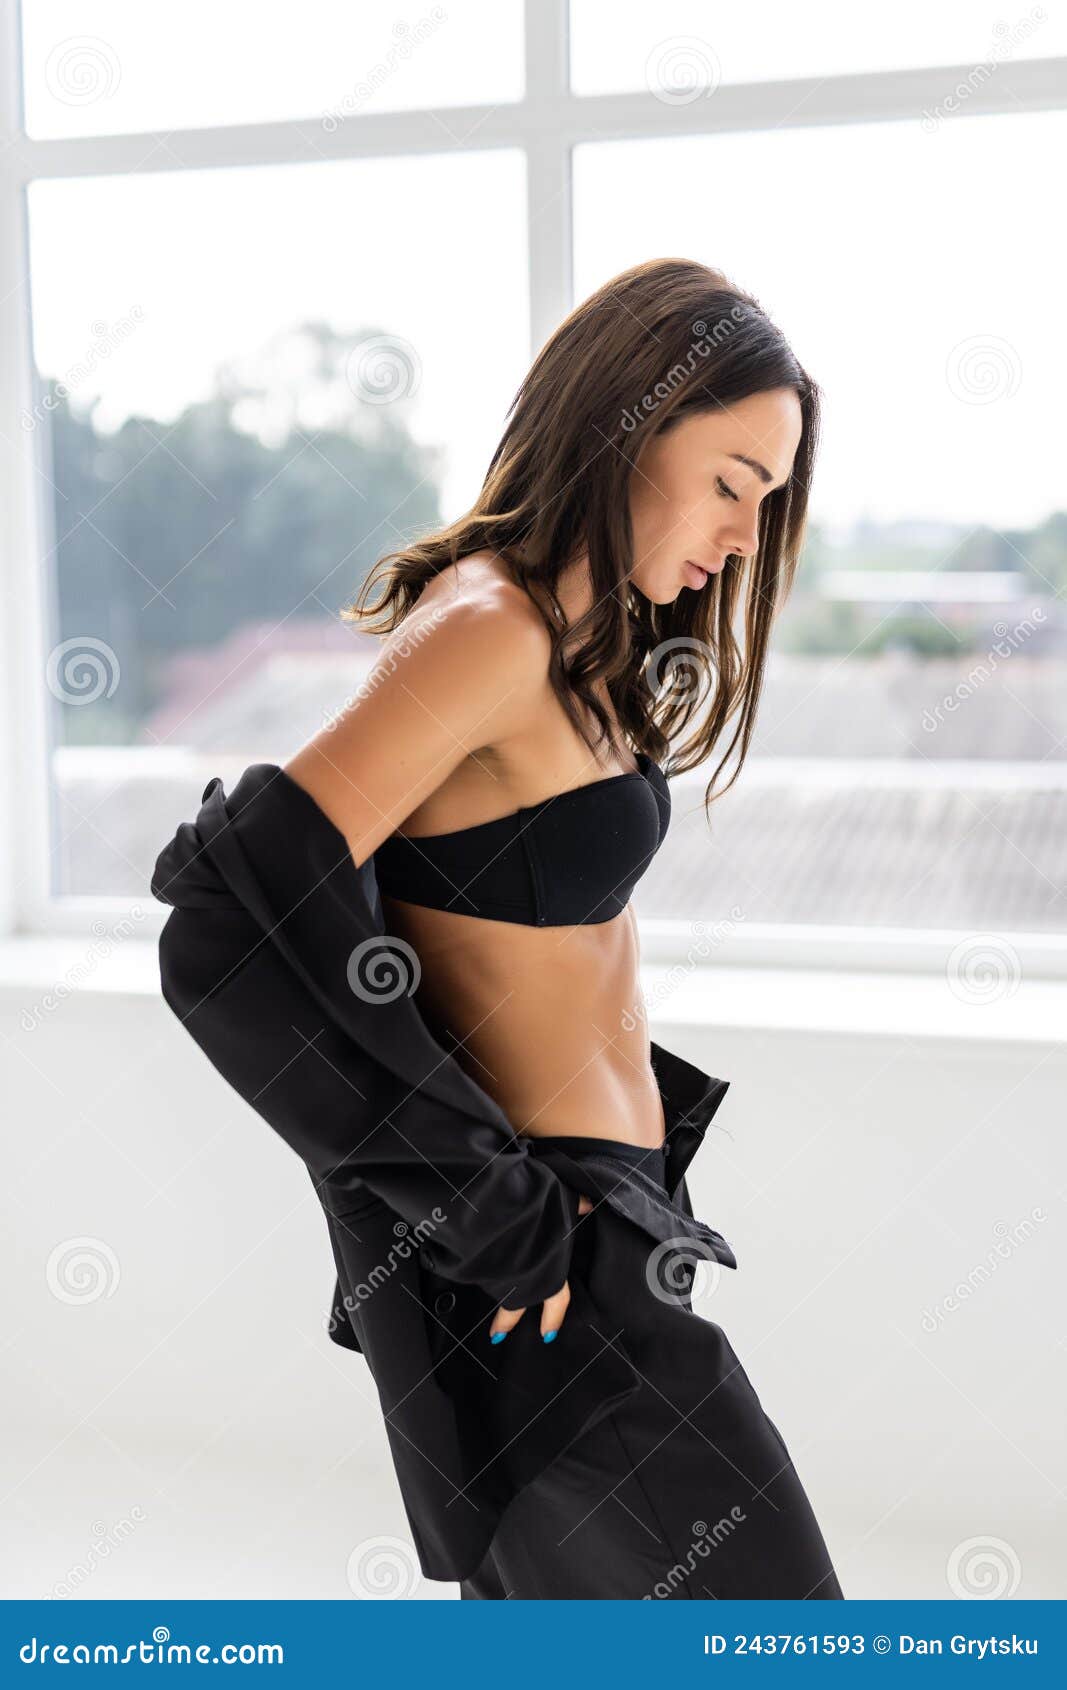 Slim Brunette Woman Wearing Fashionable Black Suit with No Bra is